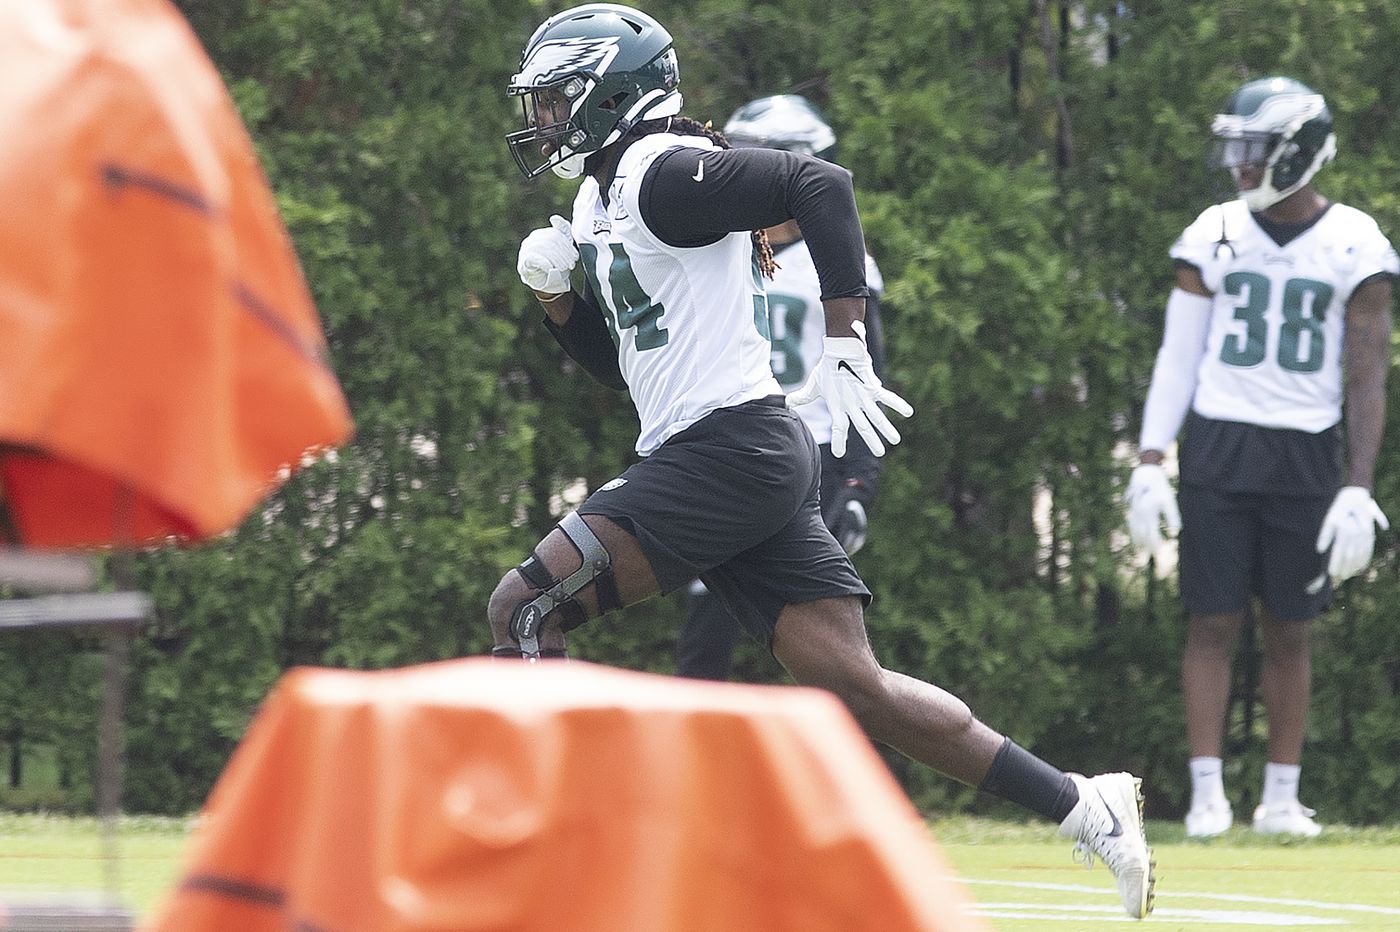 One-on-One With Eagles Defensive End Josh Sweat